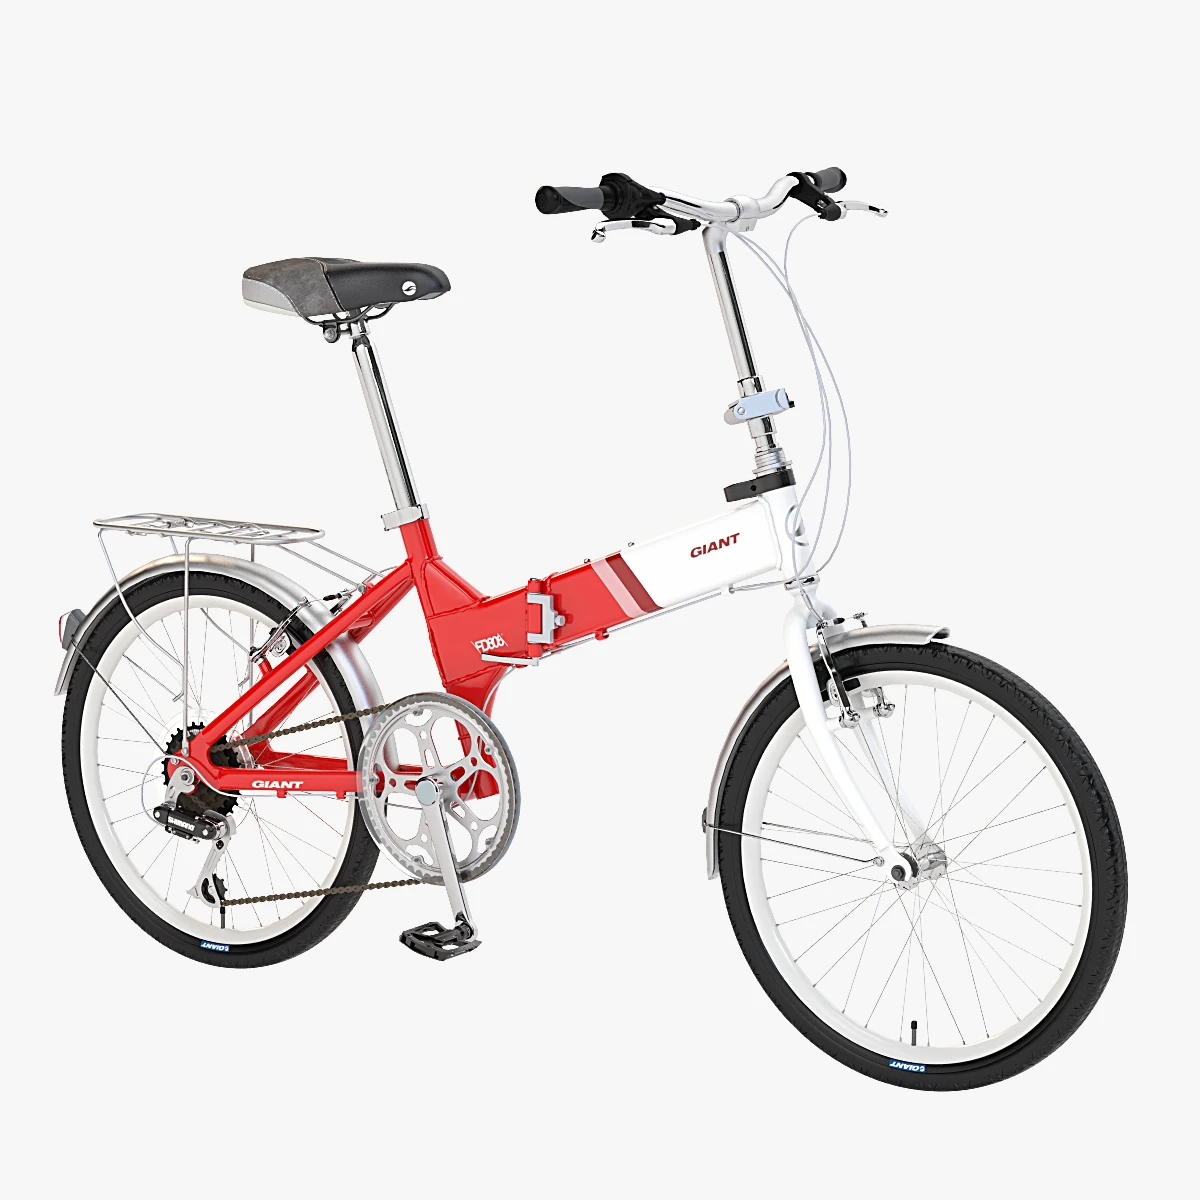 7CGI 3d bike rendering for amazon and e commerce, red and white combination color multi gear cycle. 